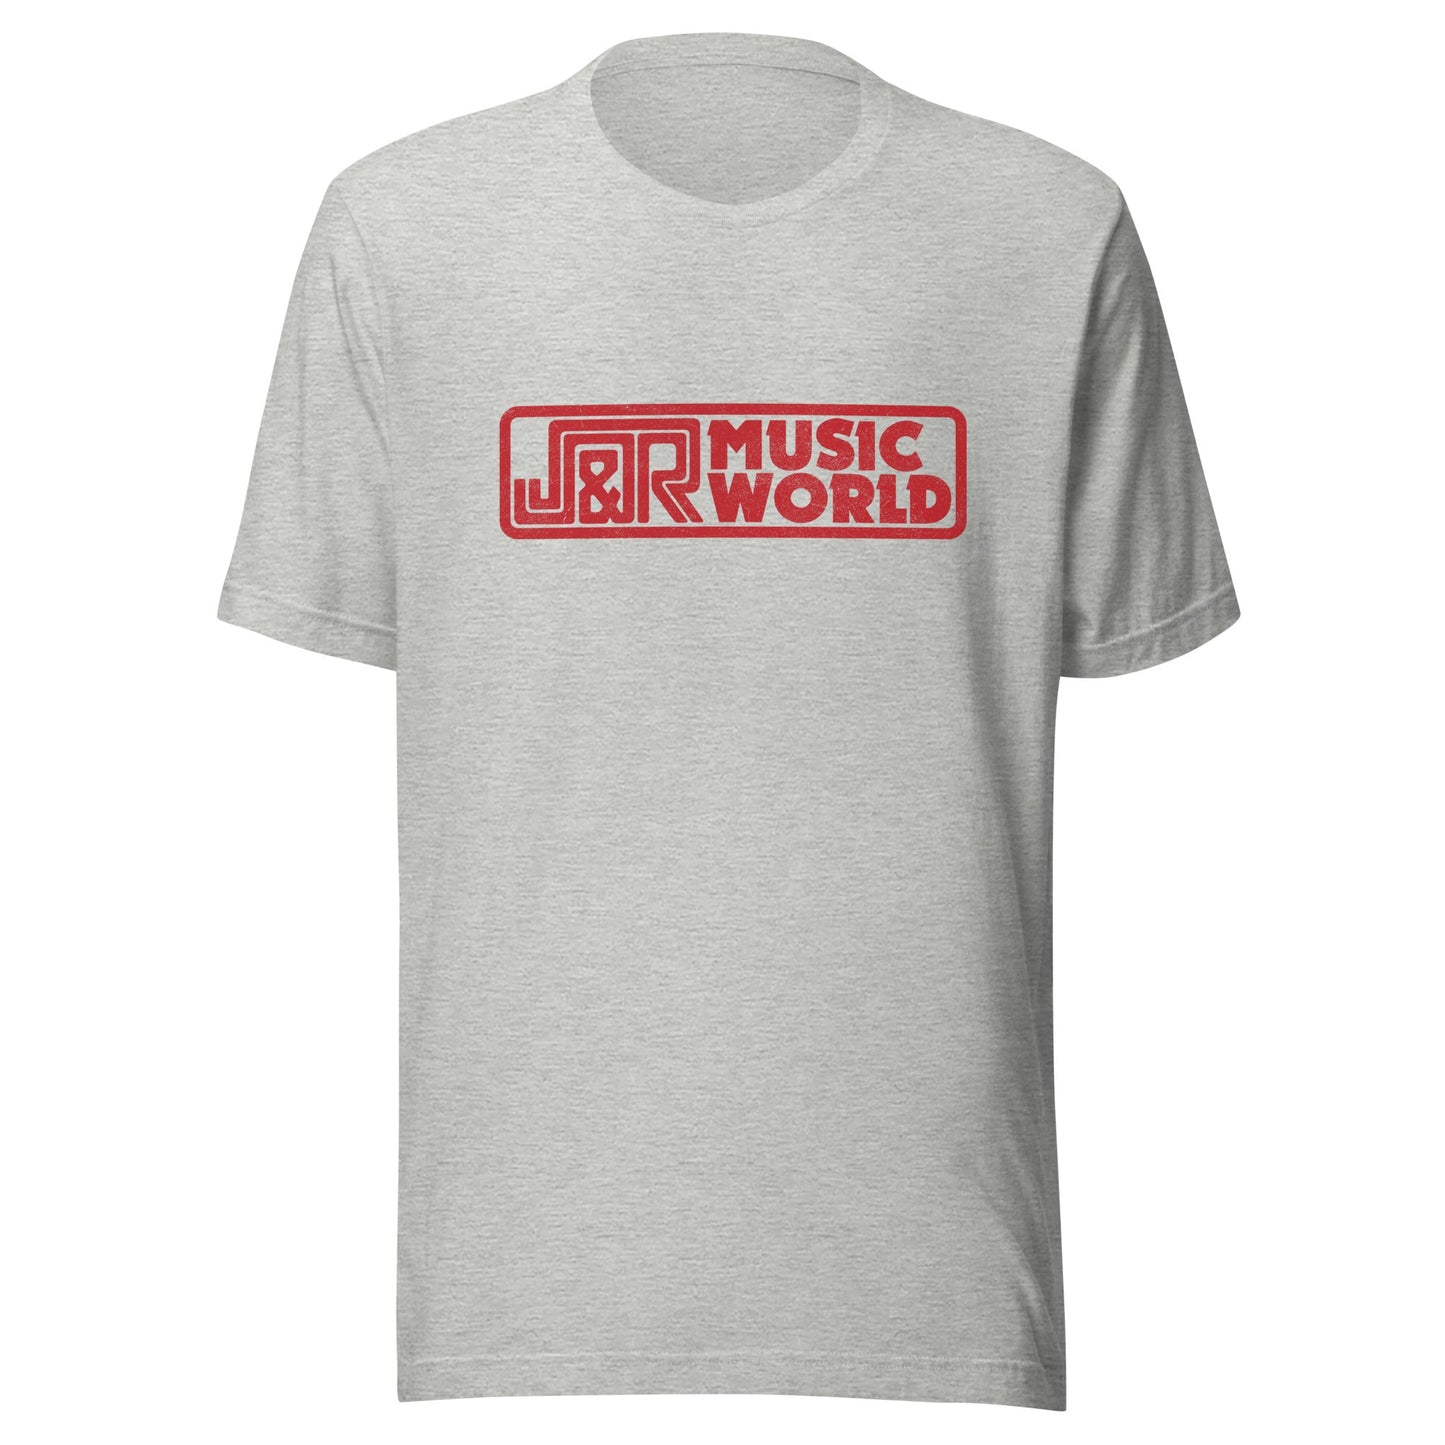 J&R Music World T-Shirt | Old School NYC Record Store Throwback Tee